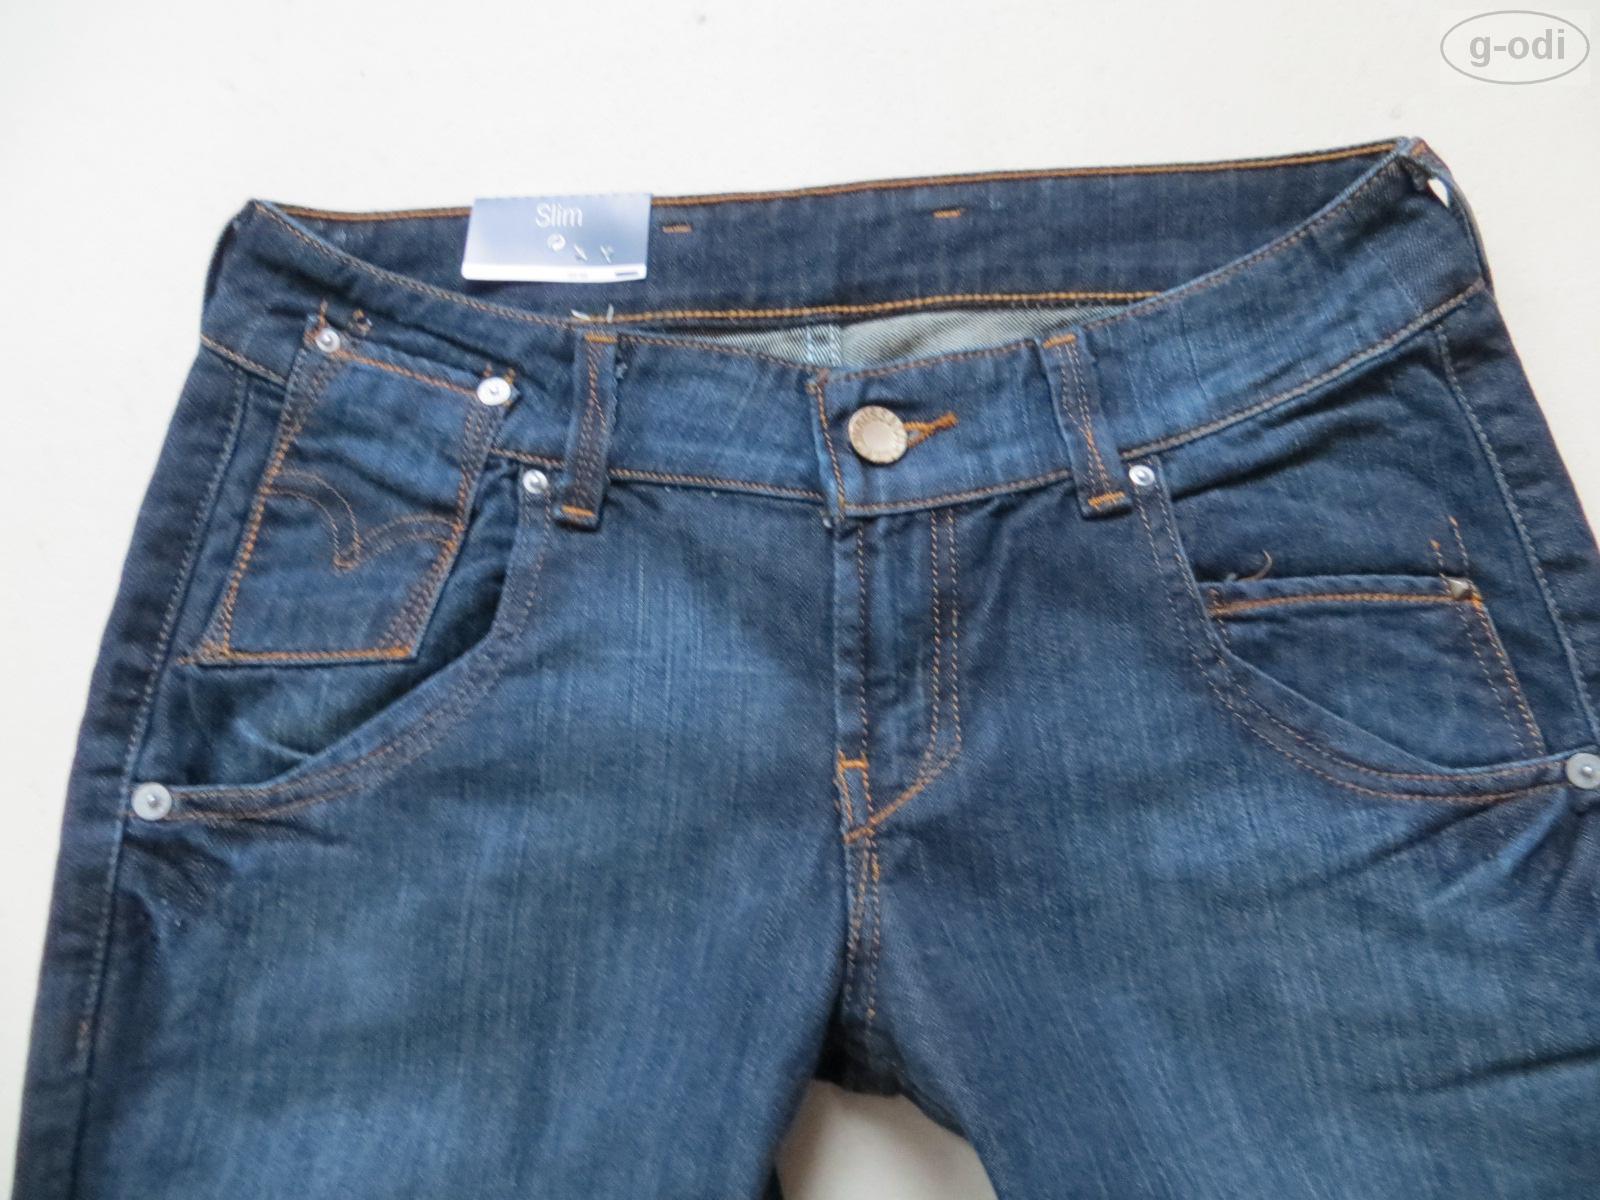 Levi's 571 Slim Fit Jeans Trousers, w 30/L 34, New! Special Edition ...